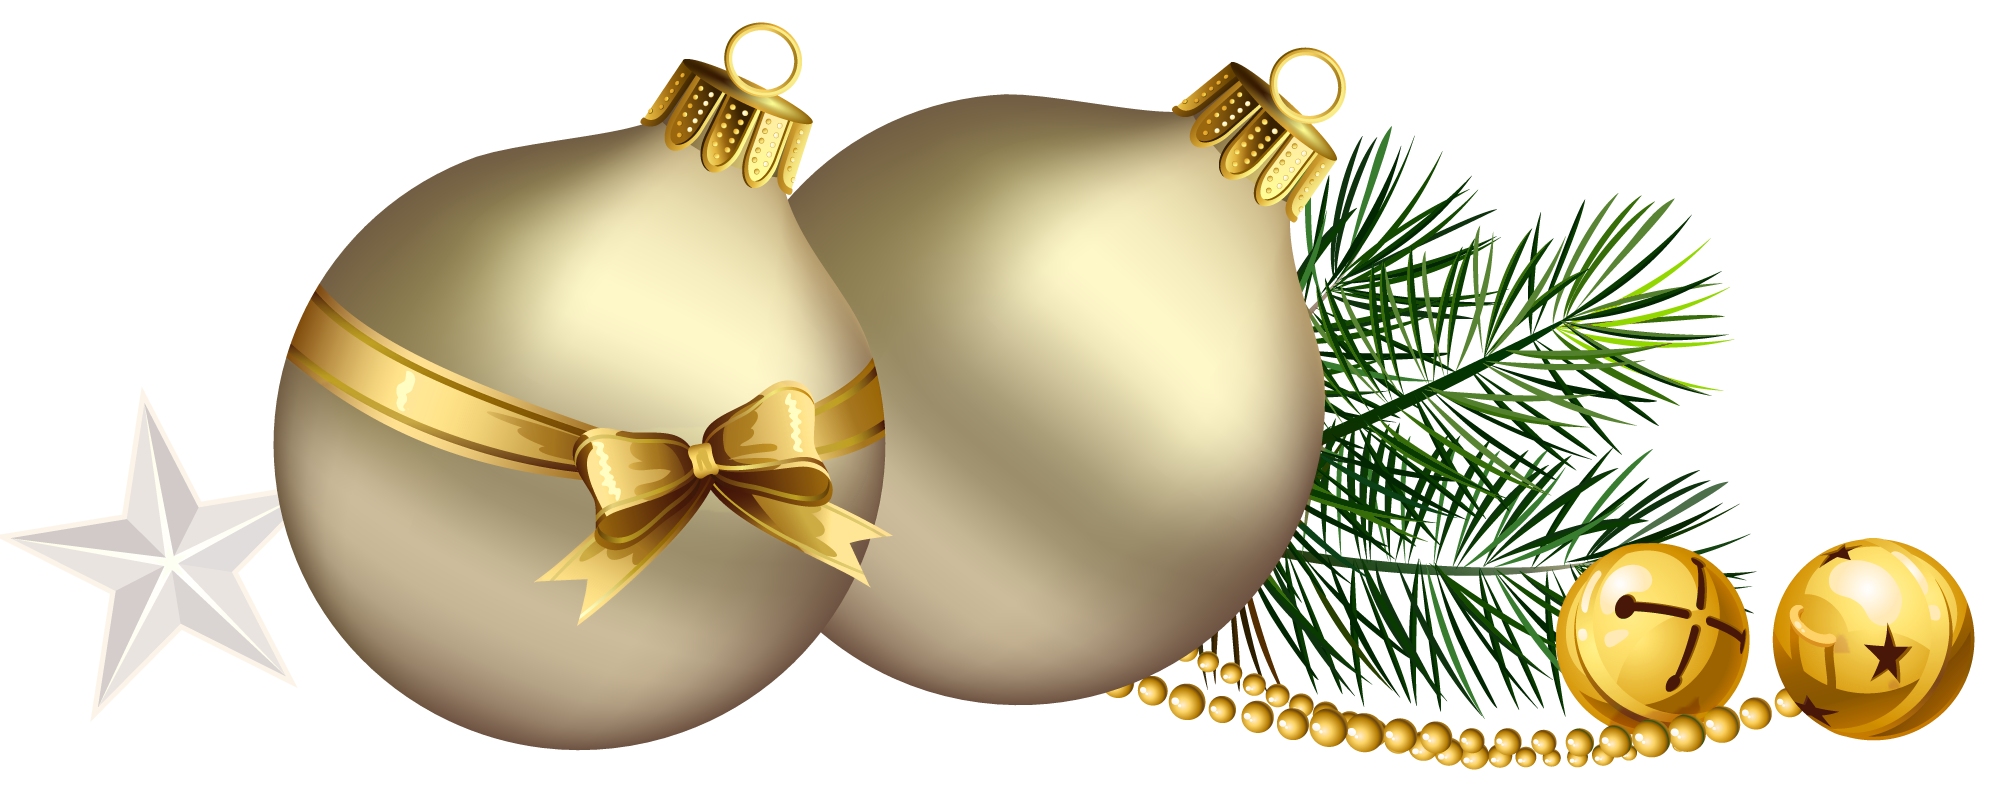 Gold Merry Christmas Decoration PNG HQ Pic